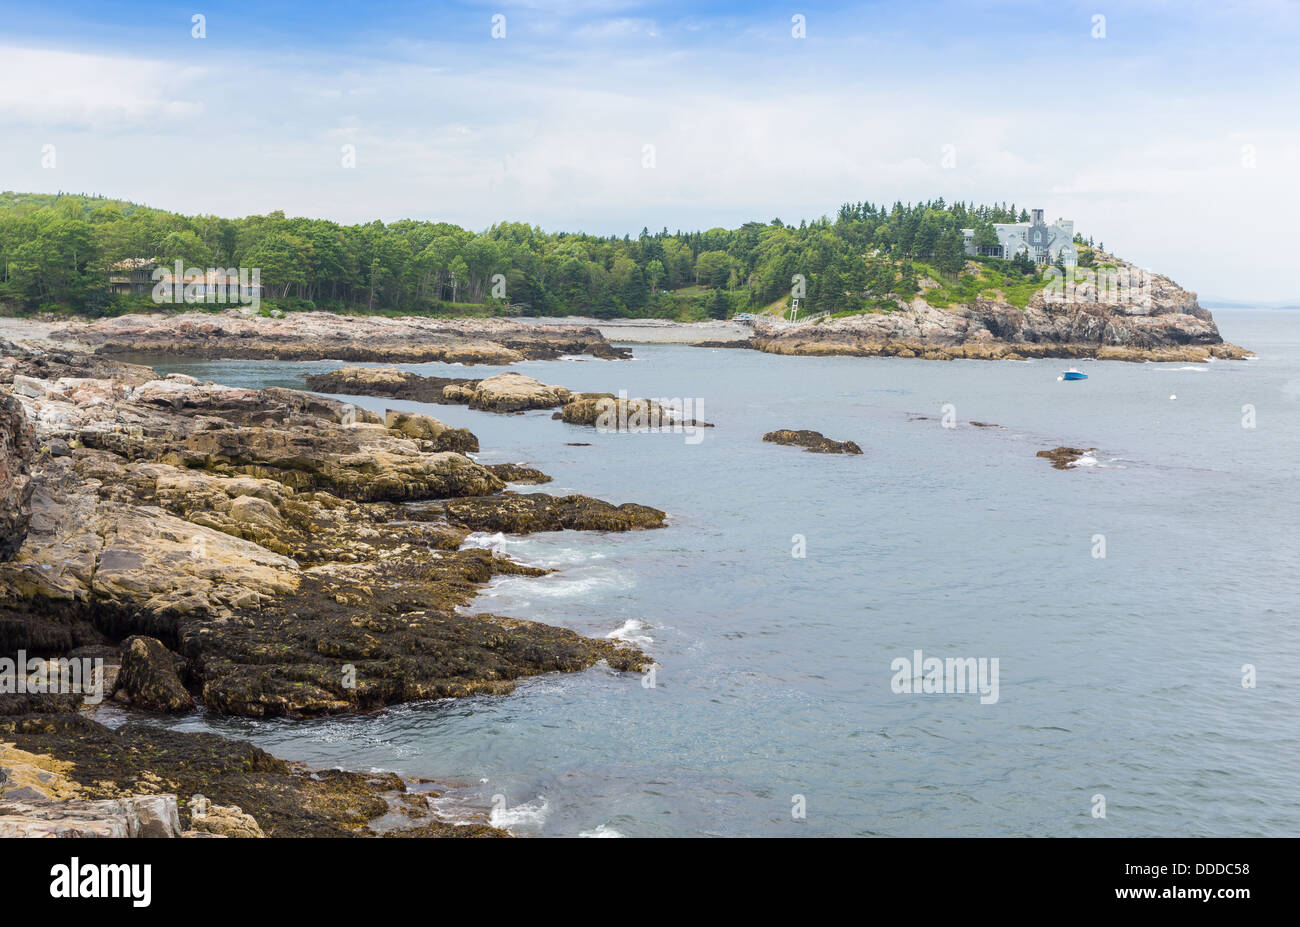 This image shows the rugged coastline and picturesque setting found at Mt Desert Island, Maine. Stock Photo